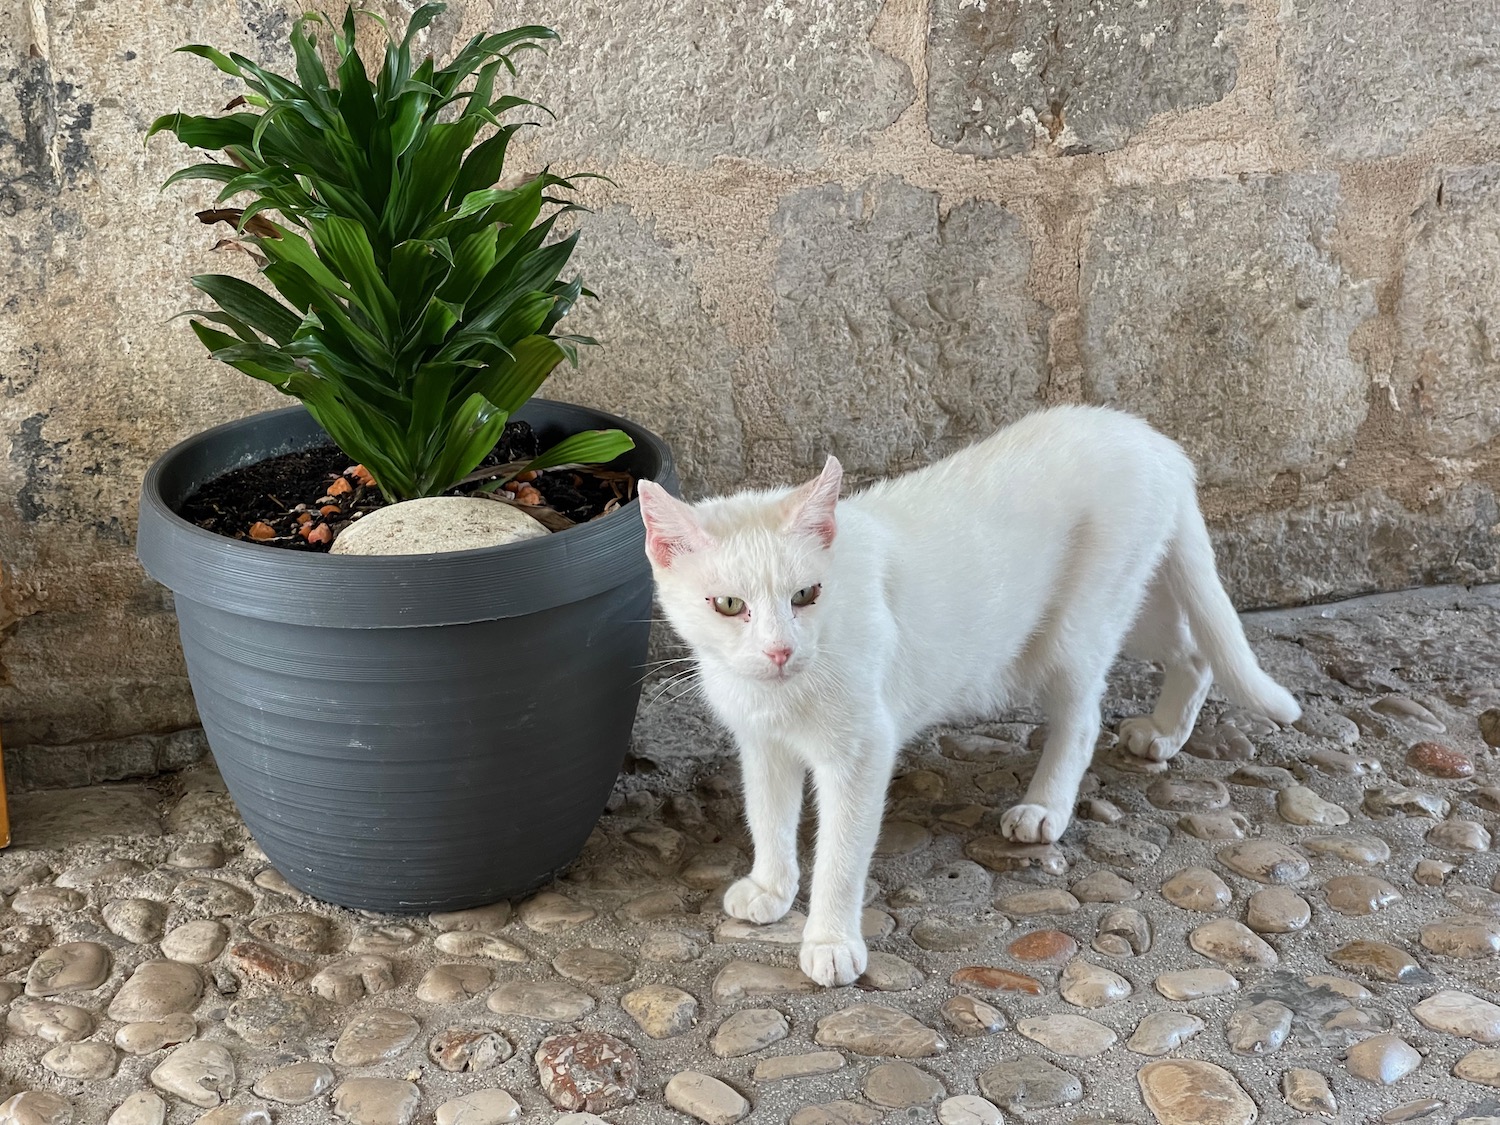 a cat standing next to a potted plant